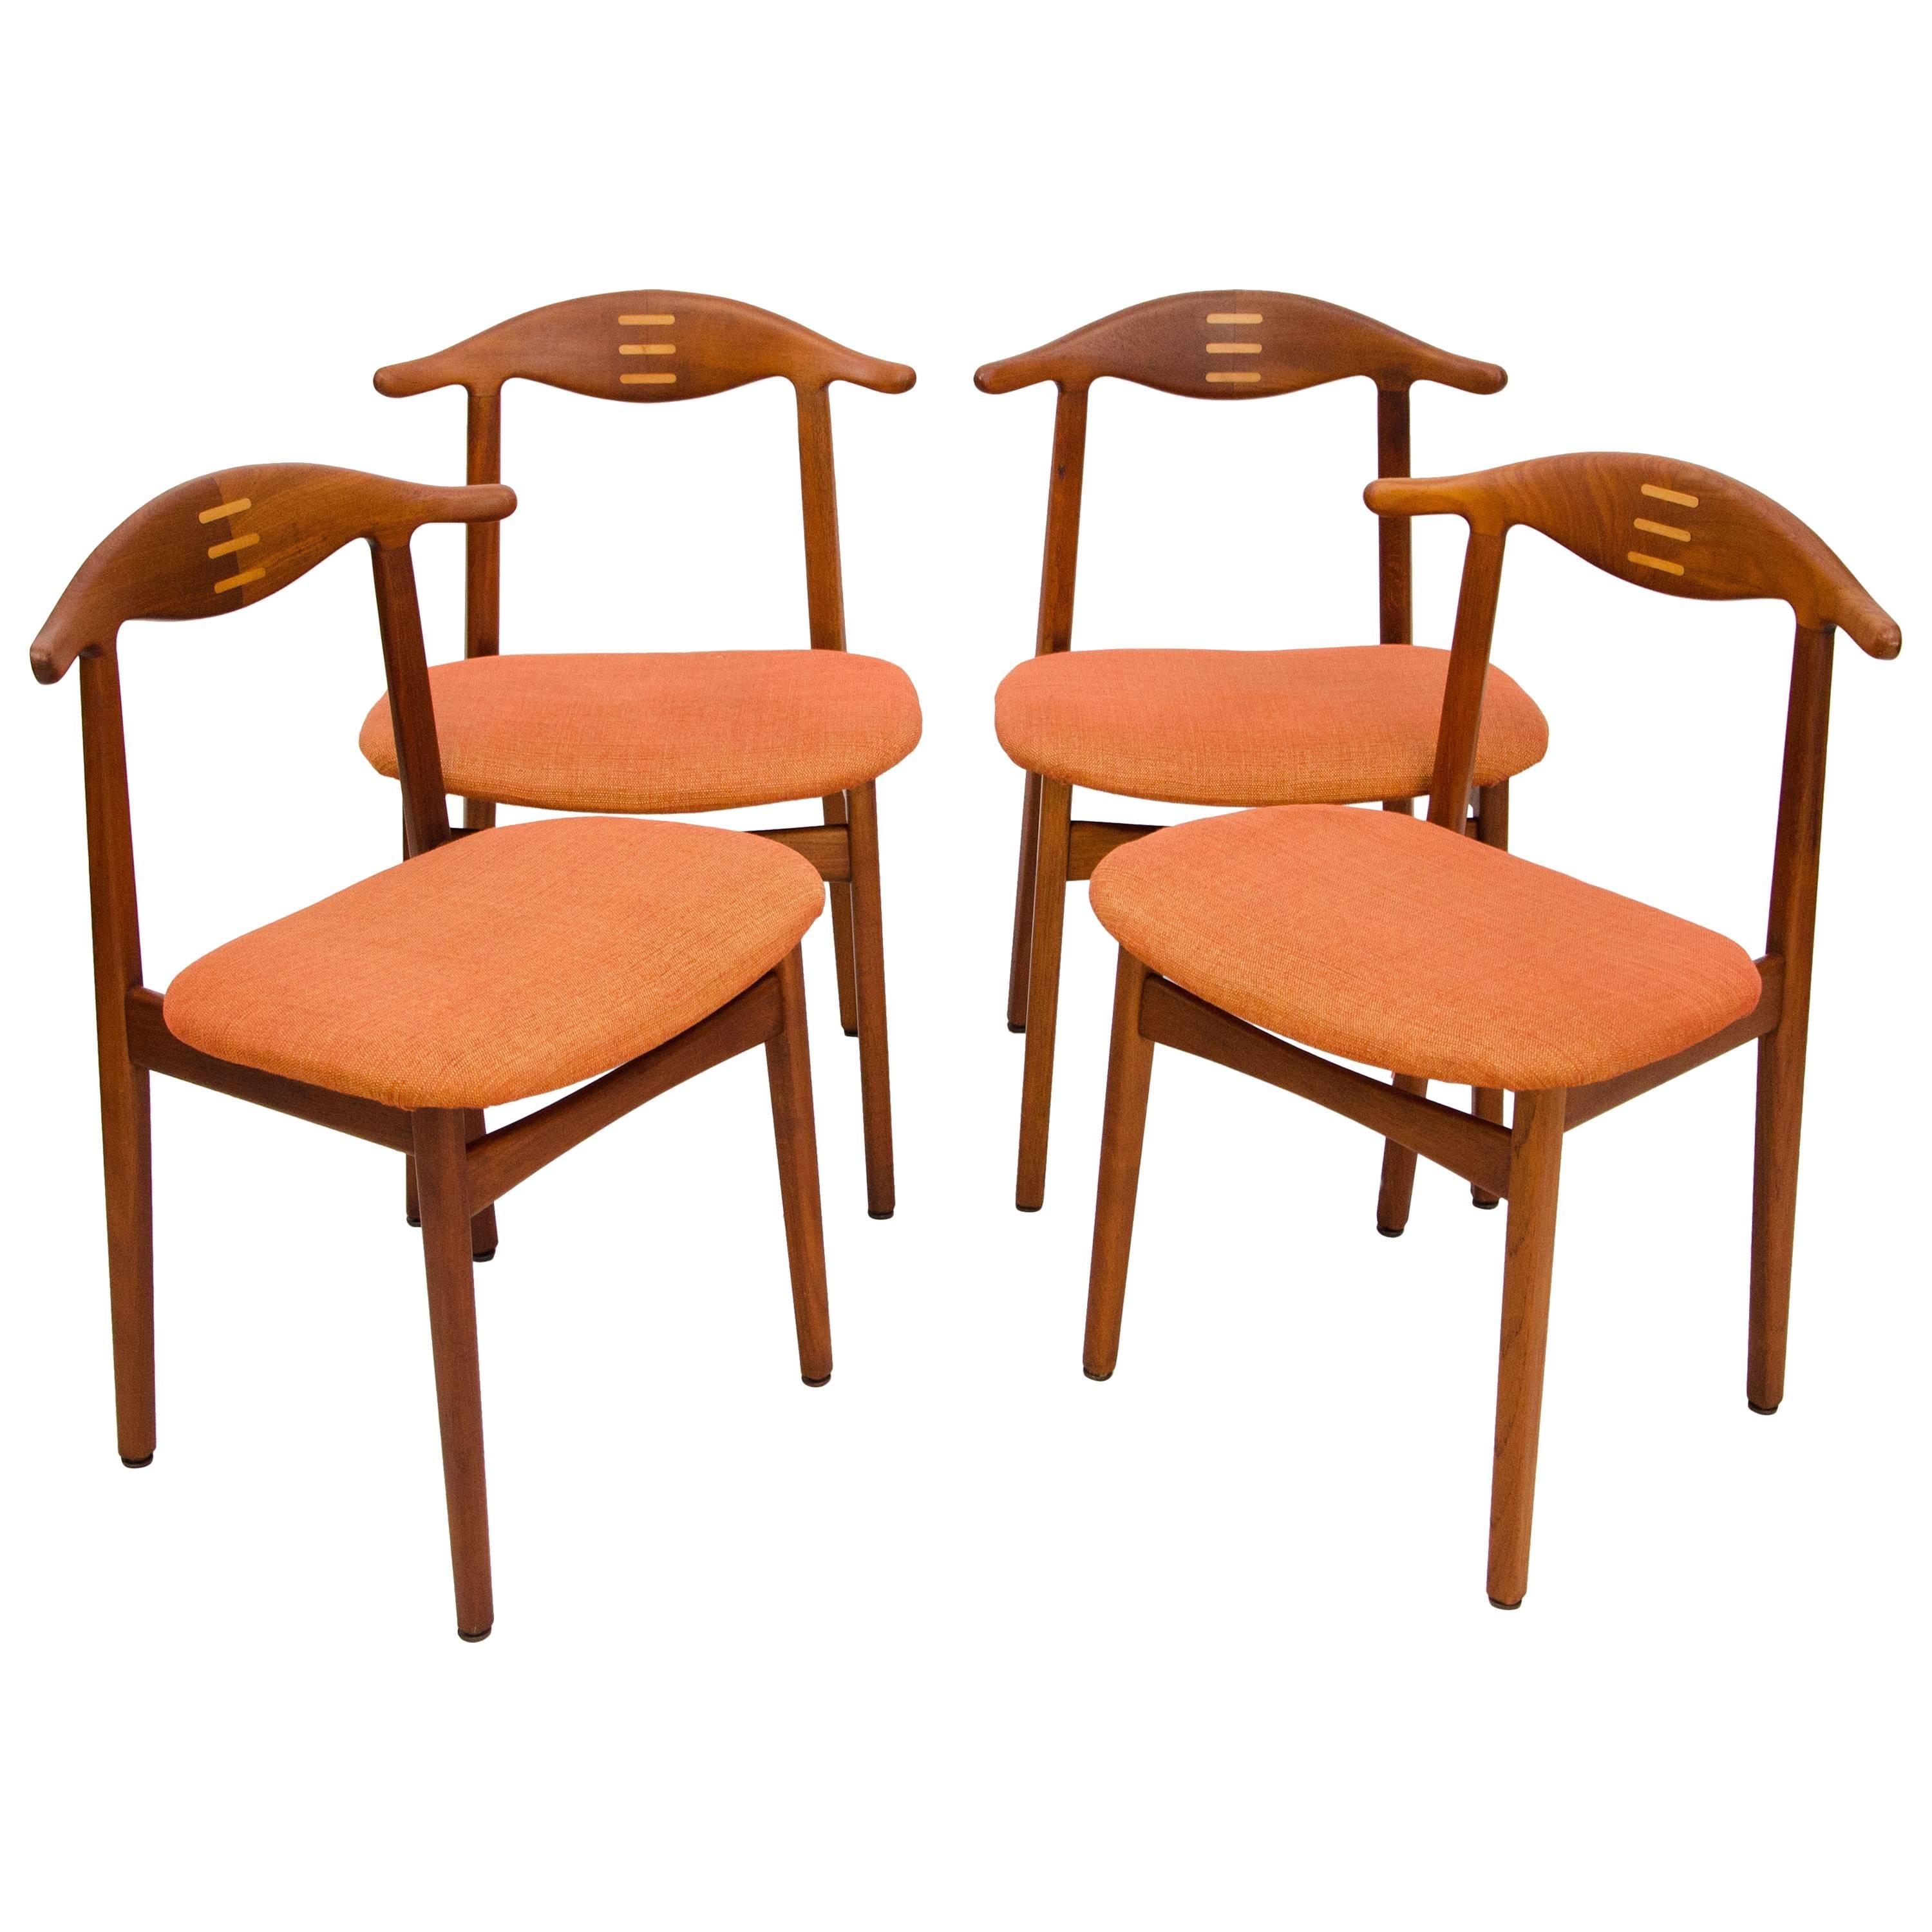 Rare Set of Four Teak Cowhorn Style Dining Chairs by Randers Stolefabrik